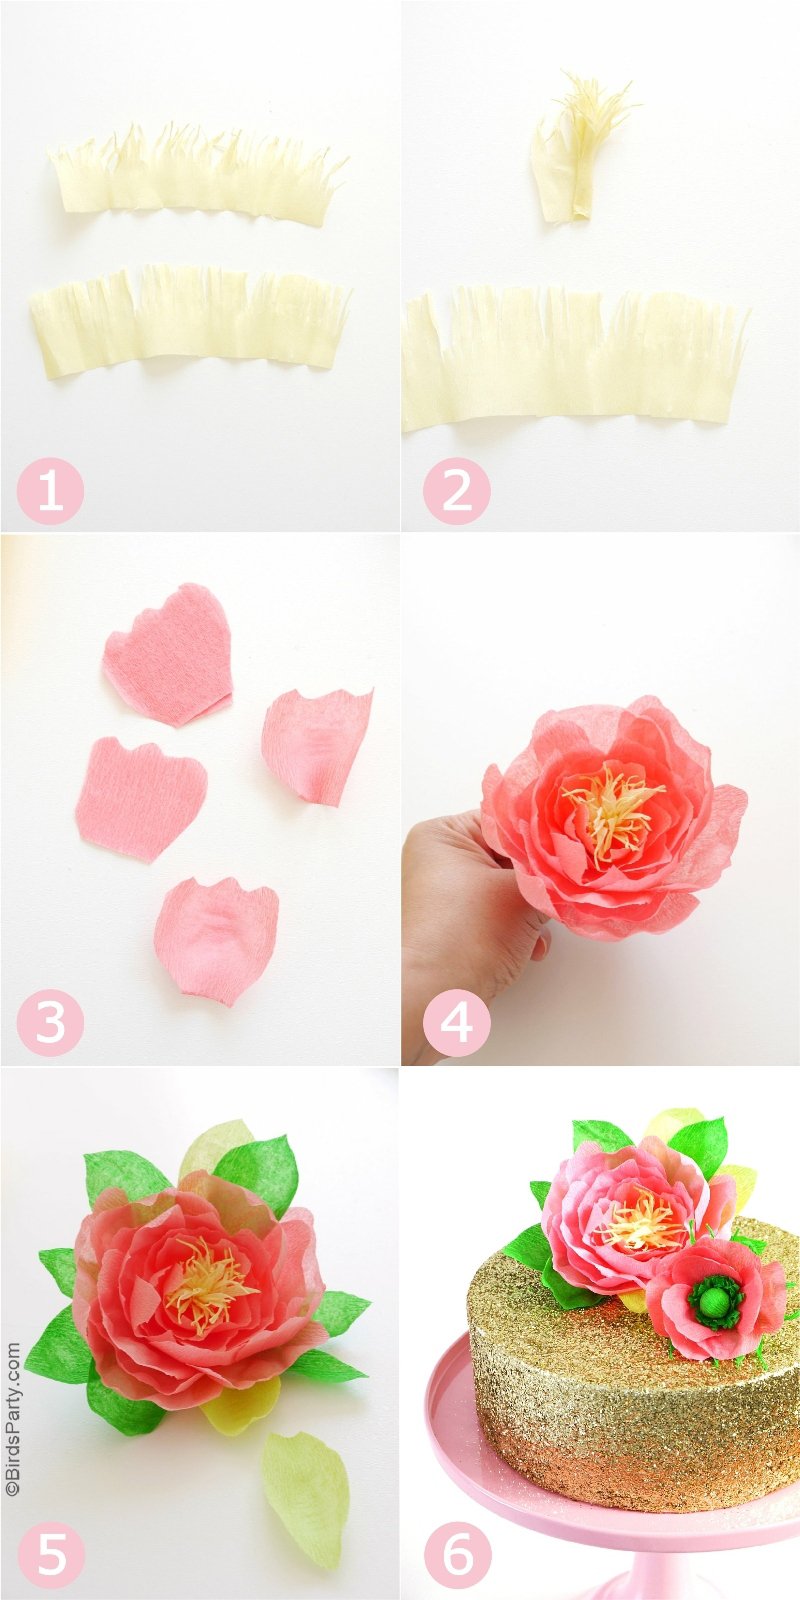 DIY Paper Flower Cake Toppers - easy and pretty decor craft to make to embellish simple birthday, wedding, bridal or baby shower cakes! by BirdsParty.com @birdsparty #diy #crafts #papercrafts #paperflowers #crepepaper #diyflowers #diypaperflowers #weddingflowers